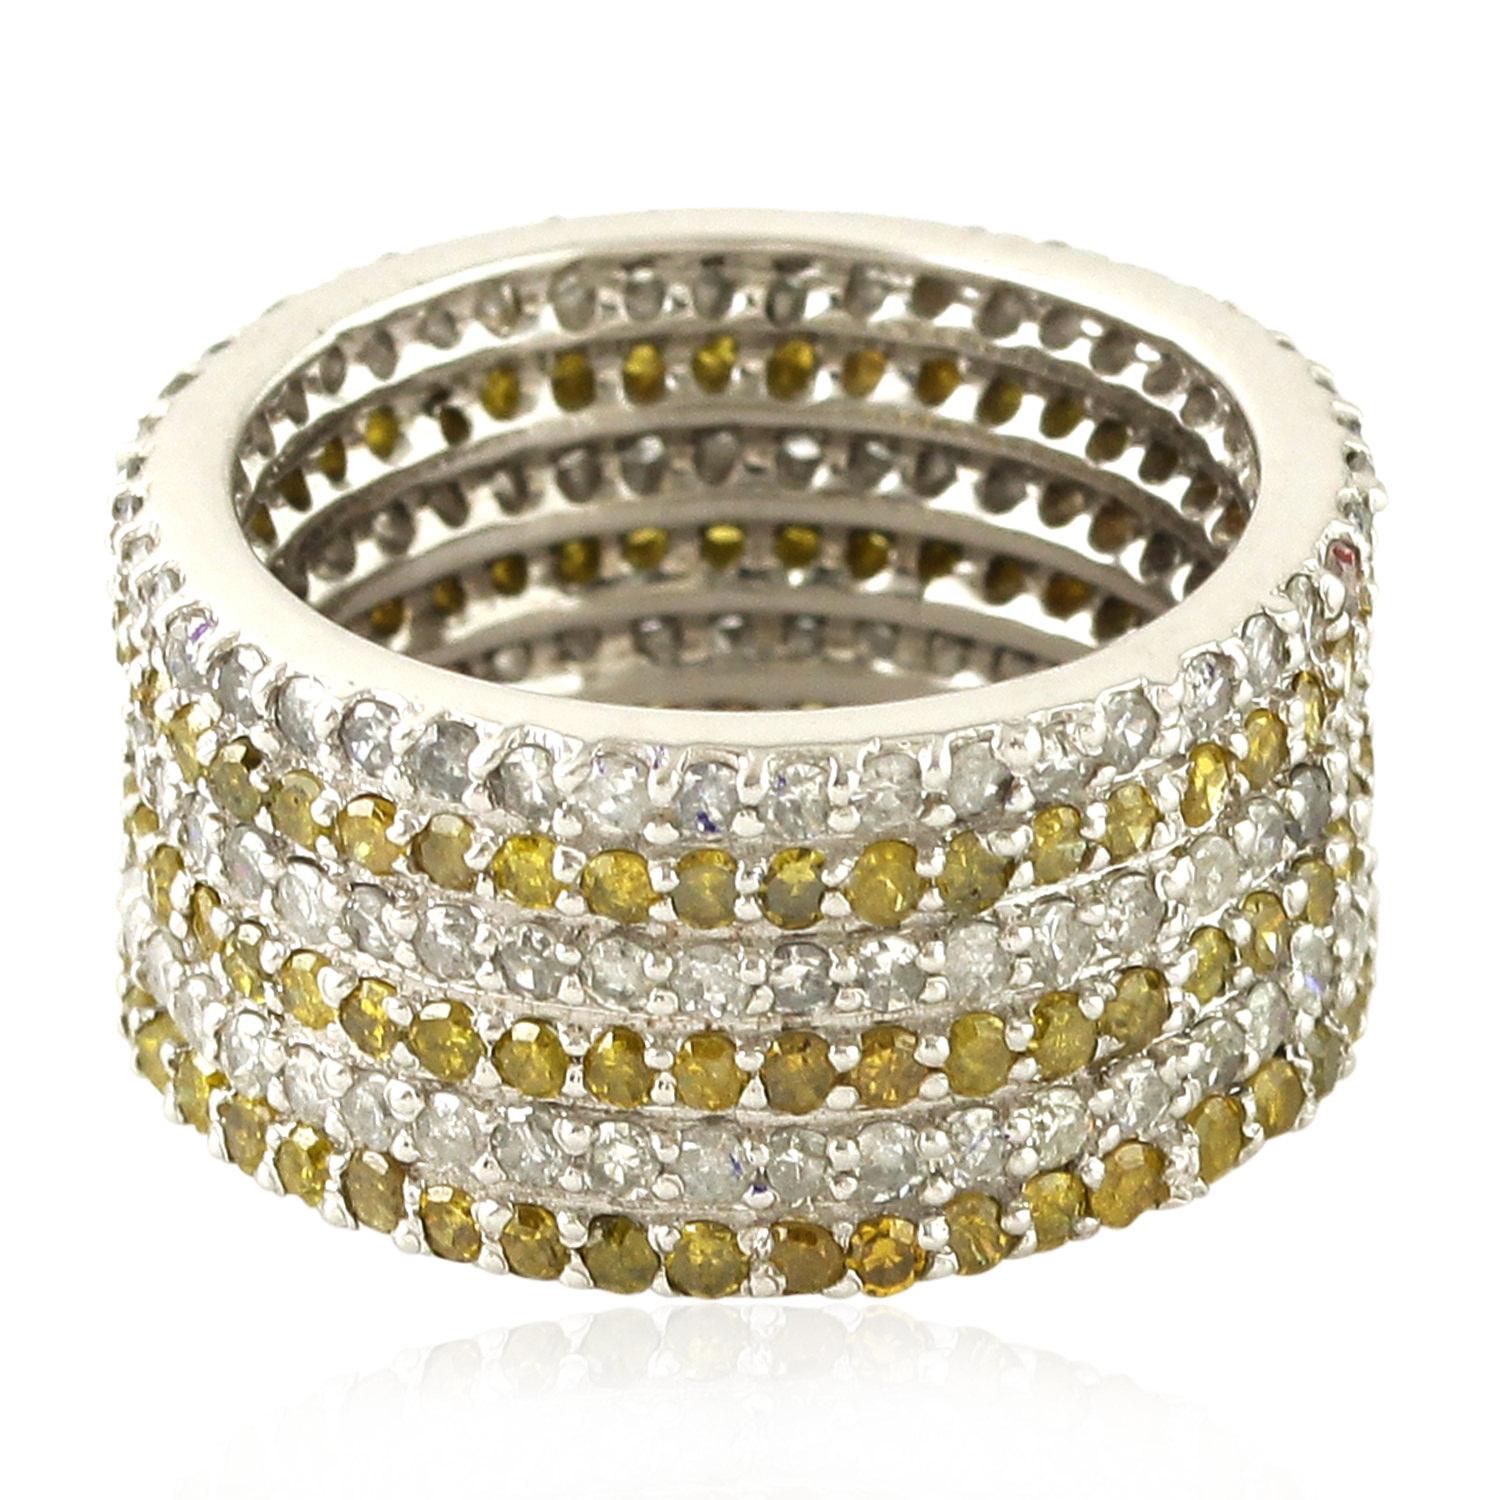 Mixed Cut Yellow & White Pave Diamond Band Ring Made In 14k White Gold For Sale